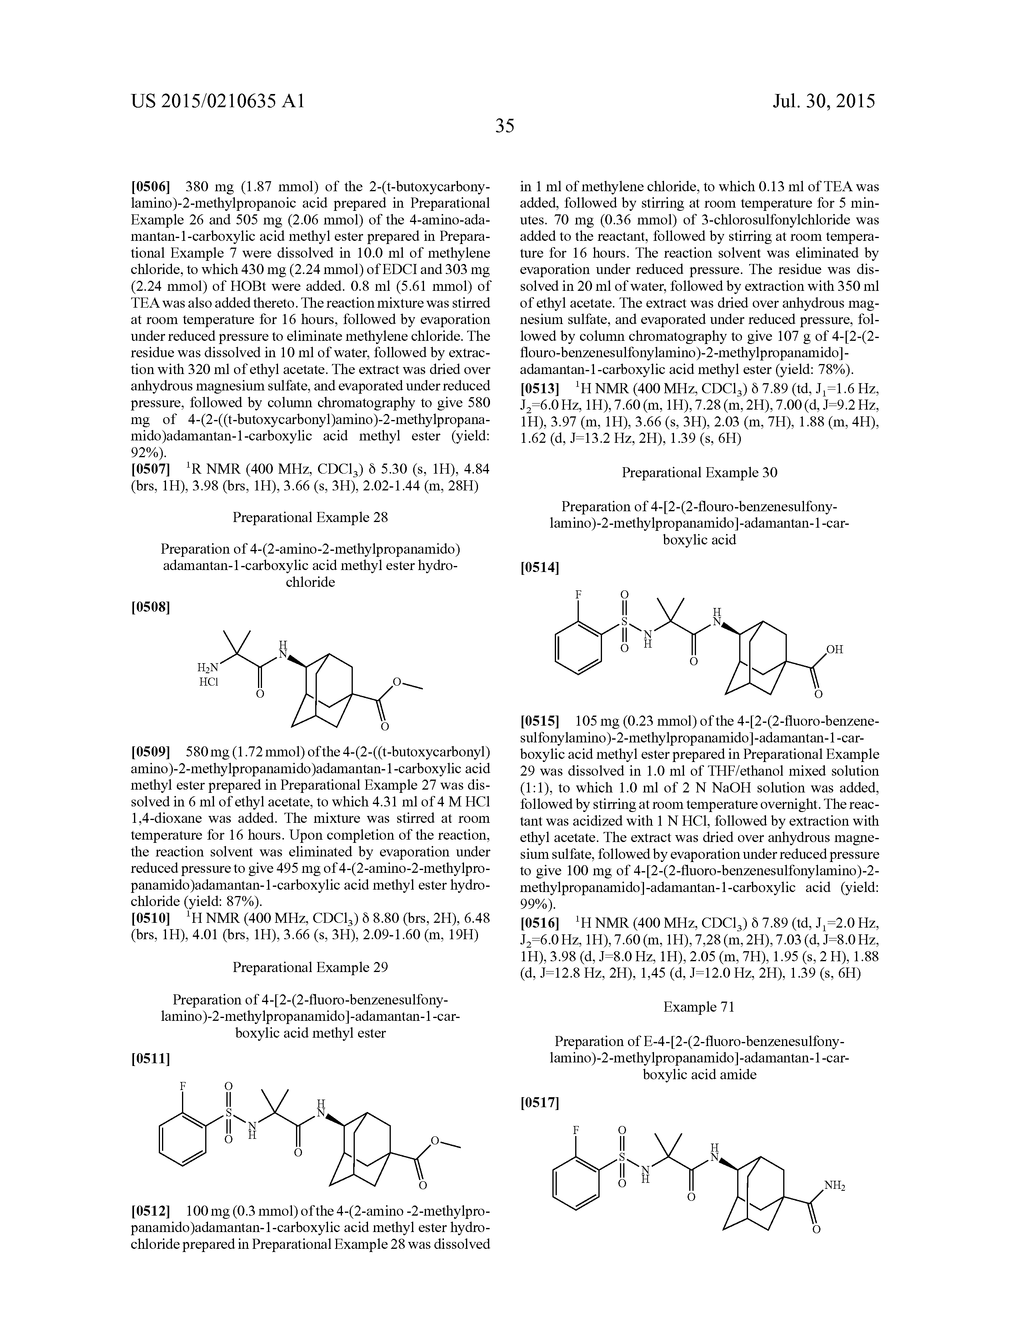 NOVEL COMPOUND HAVING ABILITY TO INHIBIT 11B-HSD1 ENZYME OR     PHARMACEUTICALLY ACCEPTABLE SALT THEREOF, METHOD FOR PRODUCING SAME, AND     PHARMACEUTICAL COMPOSITION CONTAINING SAME AS ACTIVE INGREDIENT - diagram, schematic, and image 36